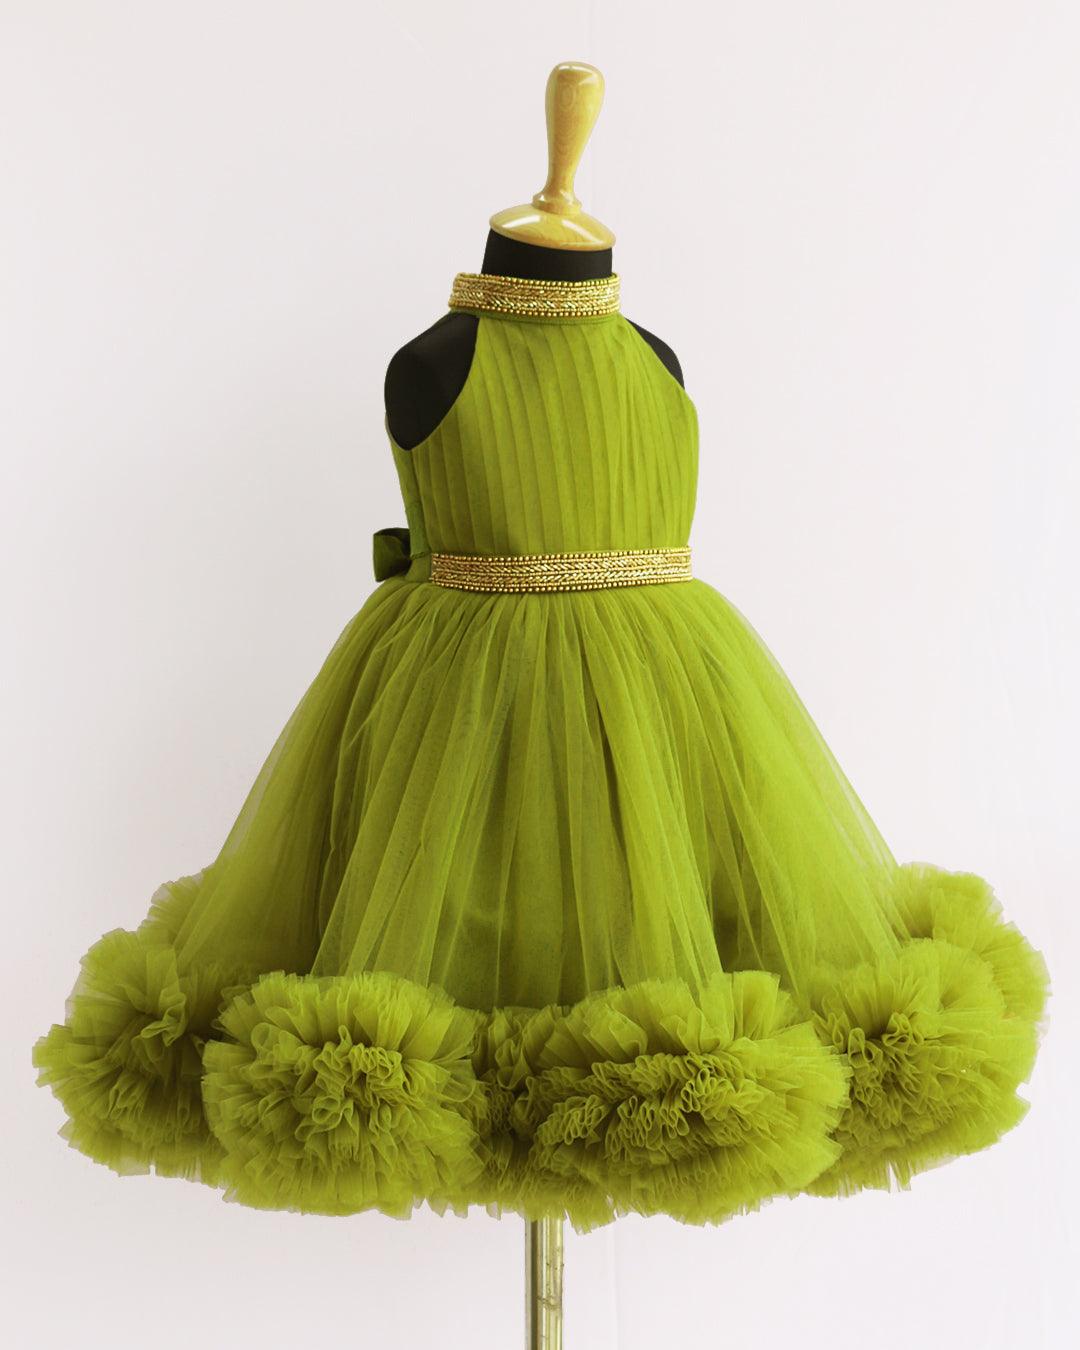 Peagreen Pleated Halter Neck Ruffled Frock.